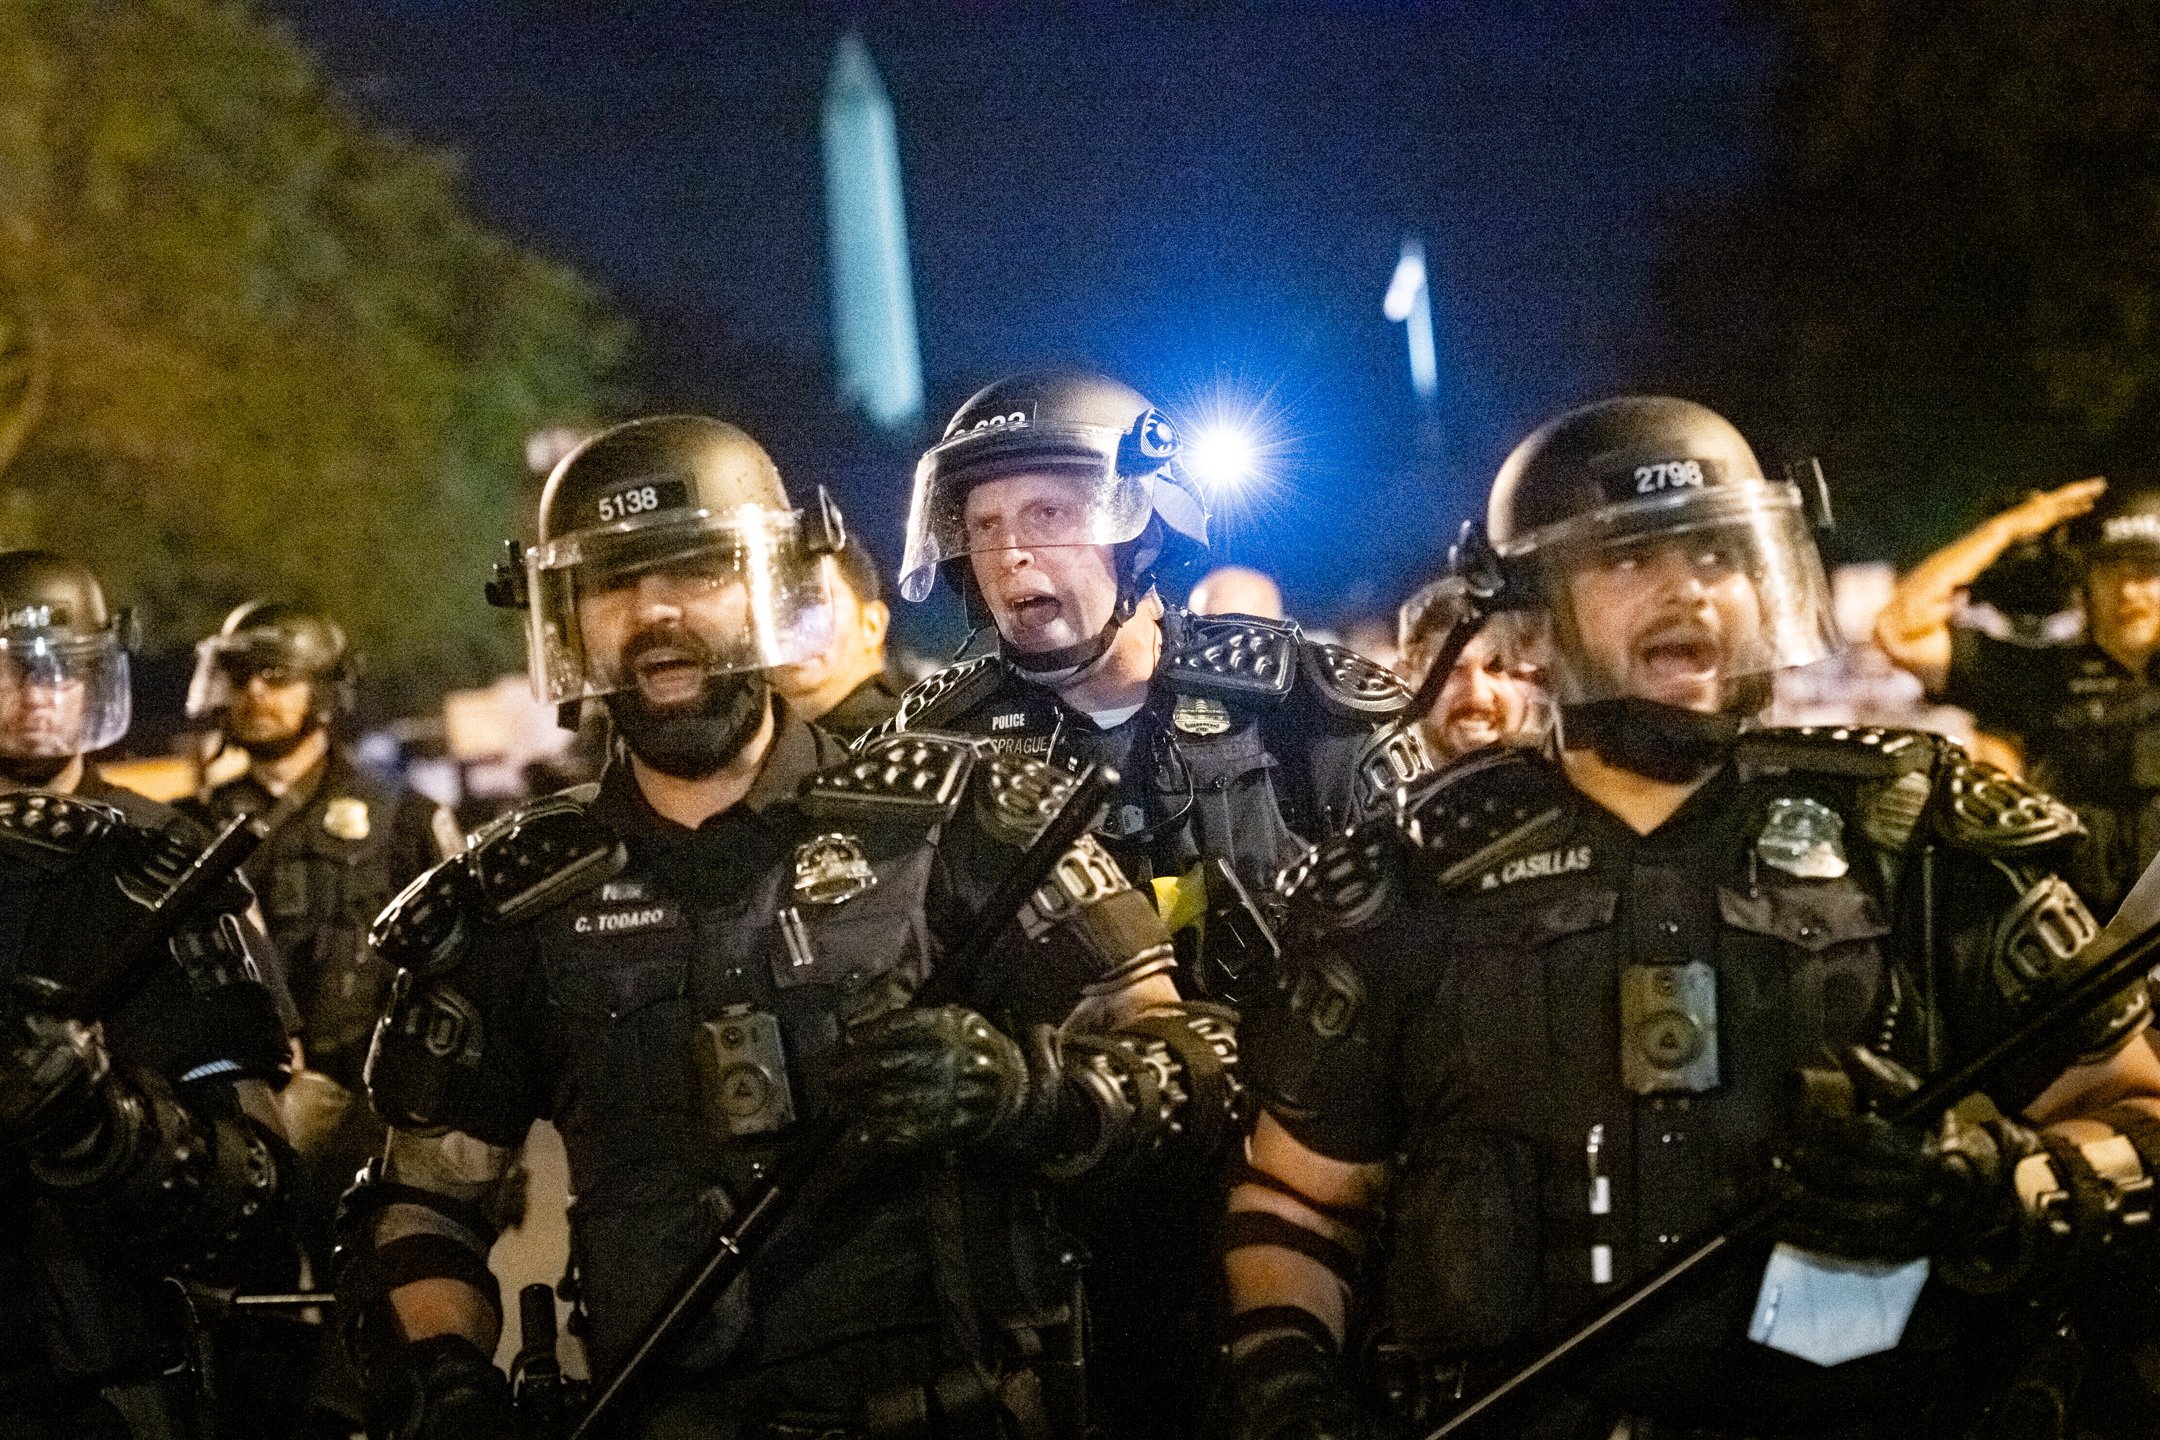  Police officers wearing riot gear use force to clear protesters from Black Lives Matter Plaza late at night, after lengthy demonstrations calling for racial justice and an end to police brutality, in Washington, D.C., on August 29, 2020. (Graeme Slo